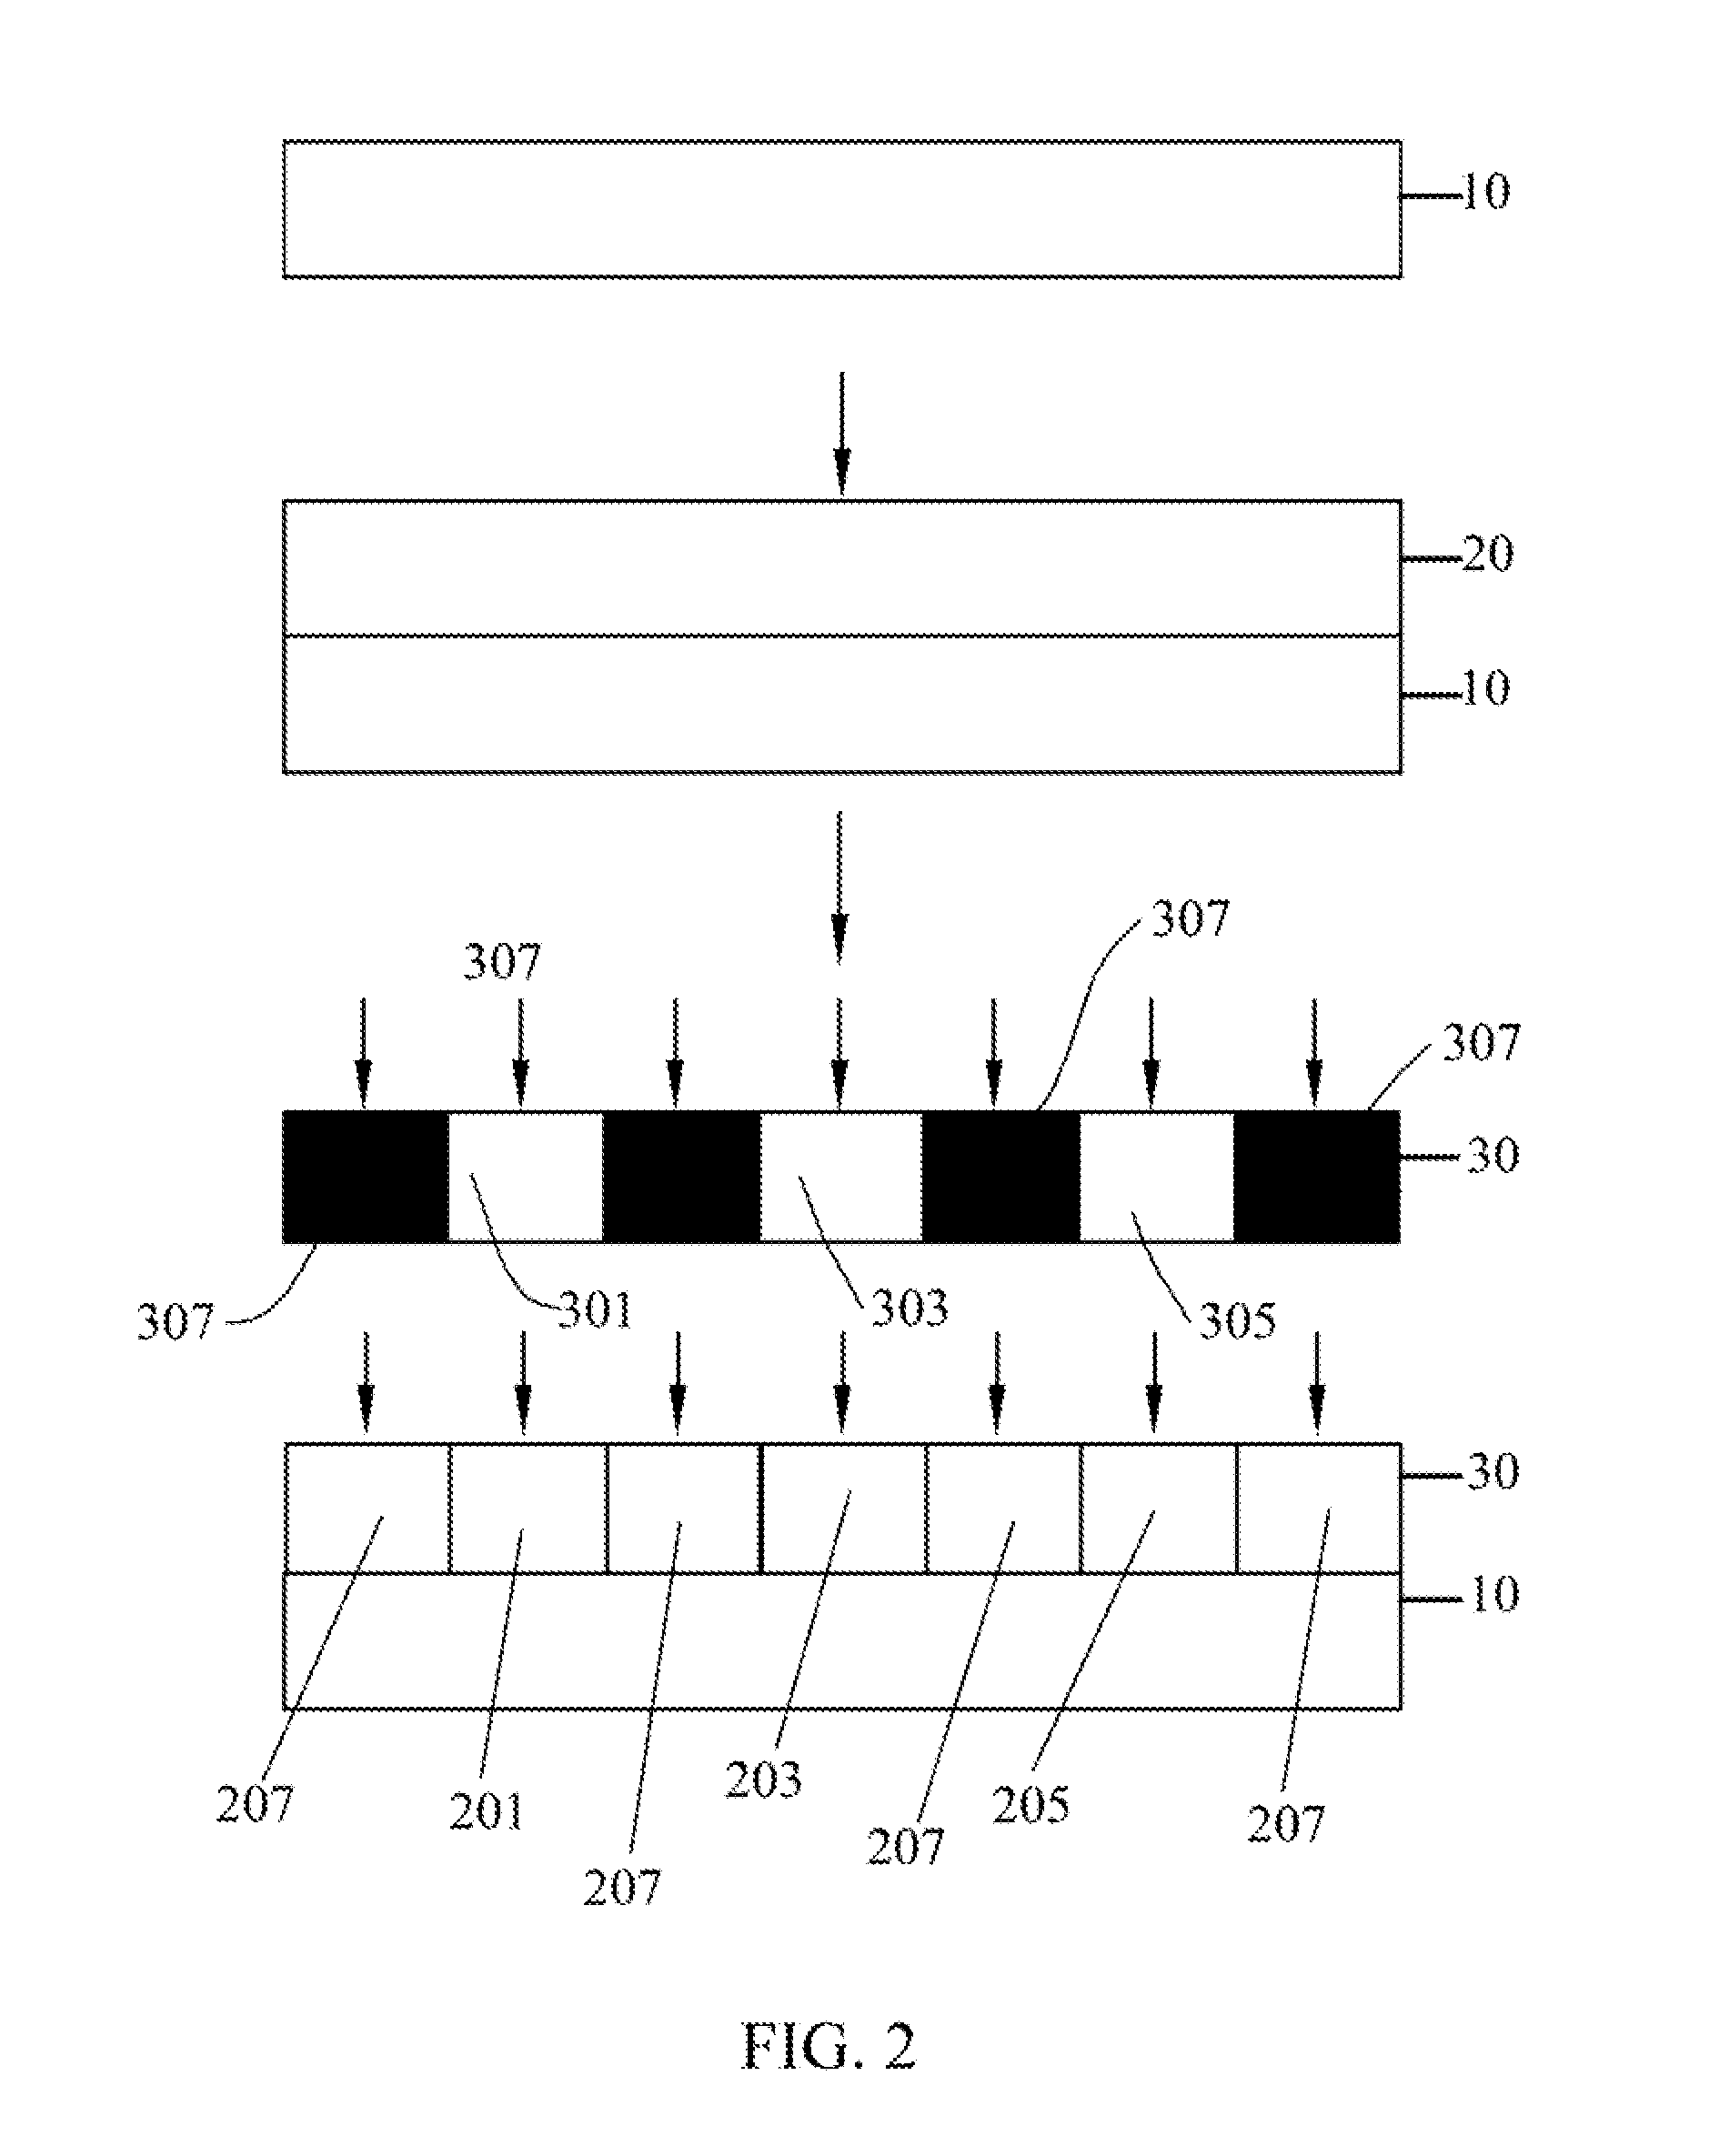 Manufacturing Method for Color Filter Substrate, Photomask and Photoreactive Layer